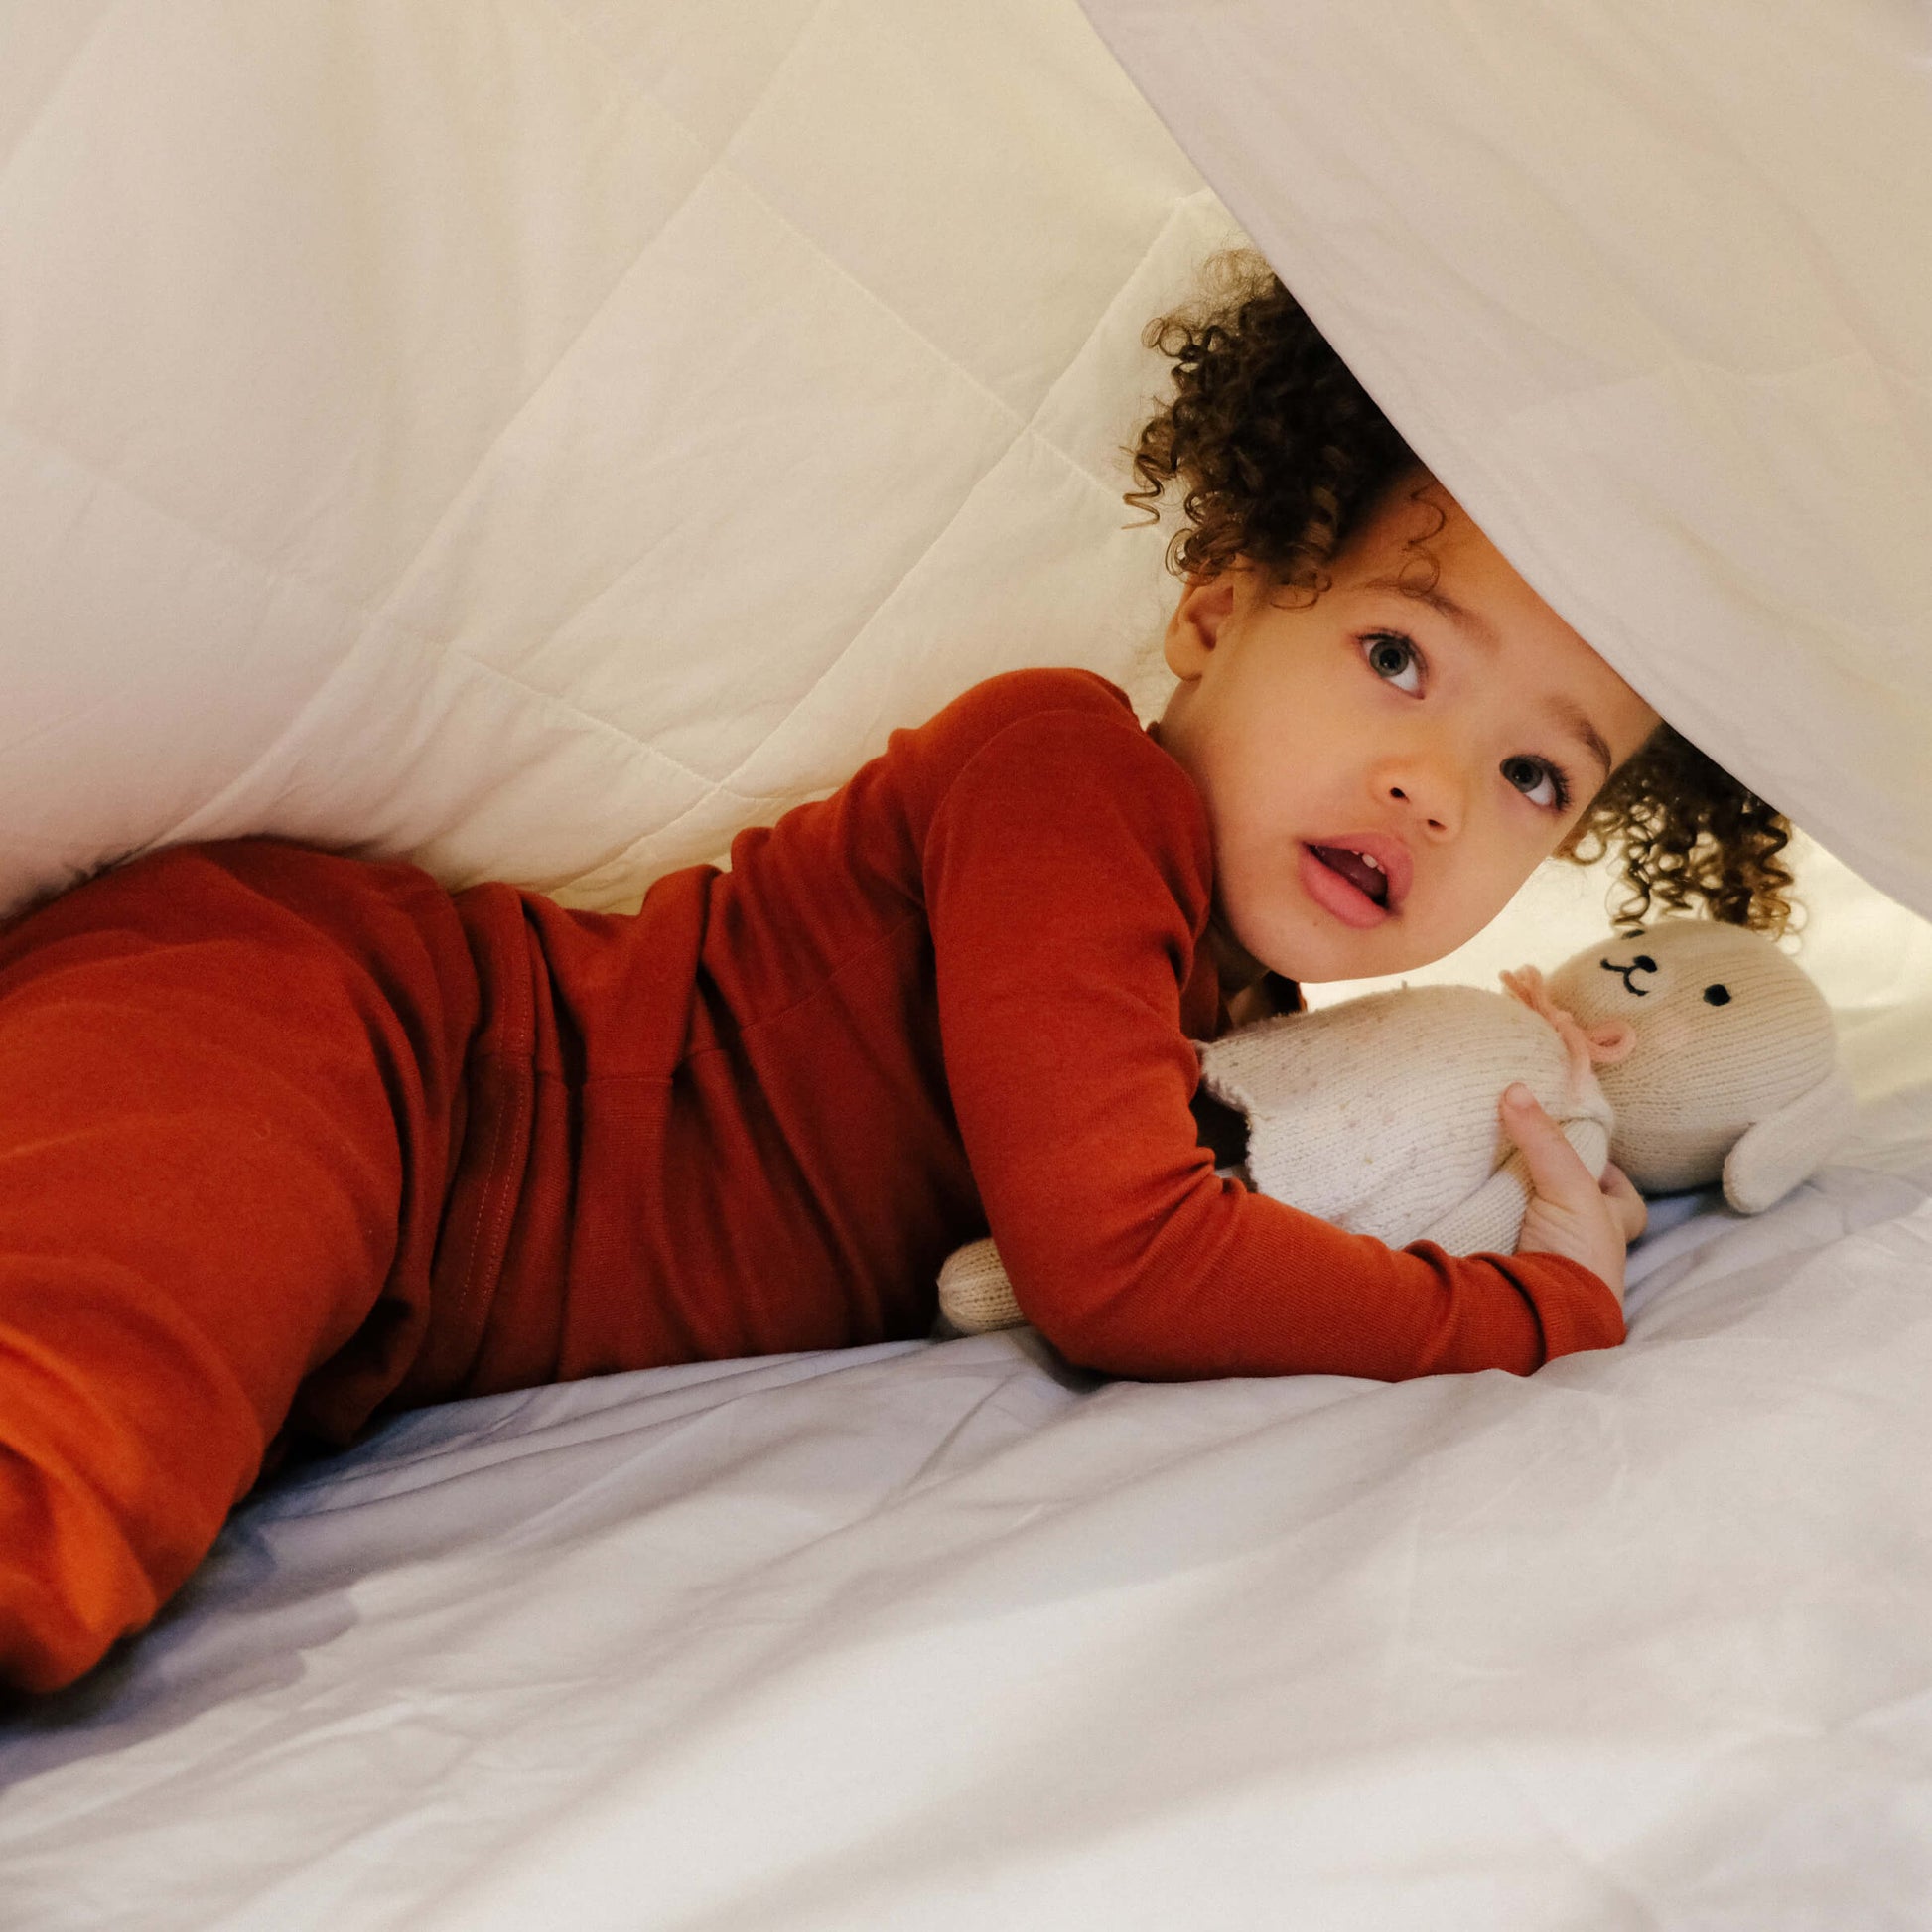 A child holding a teddy bear lying under the Slumber Cloud Comforter made with temperature regulation technology